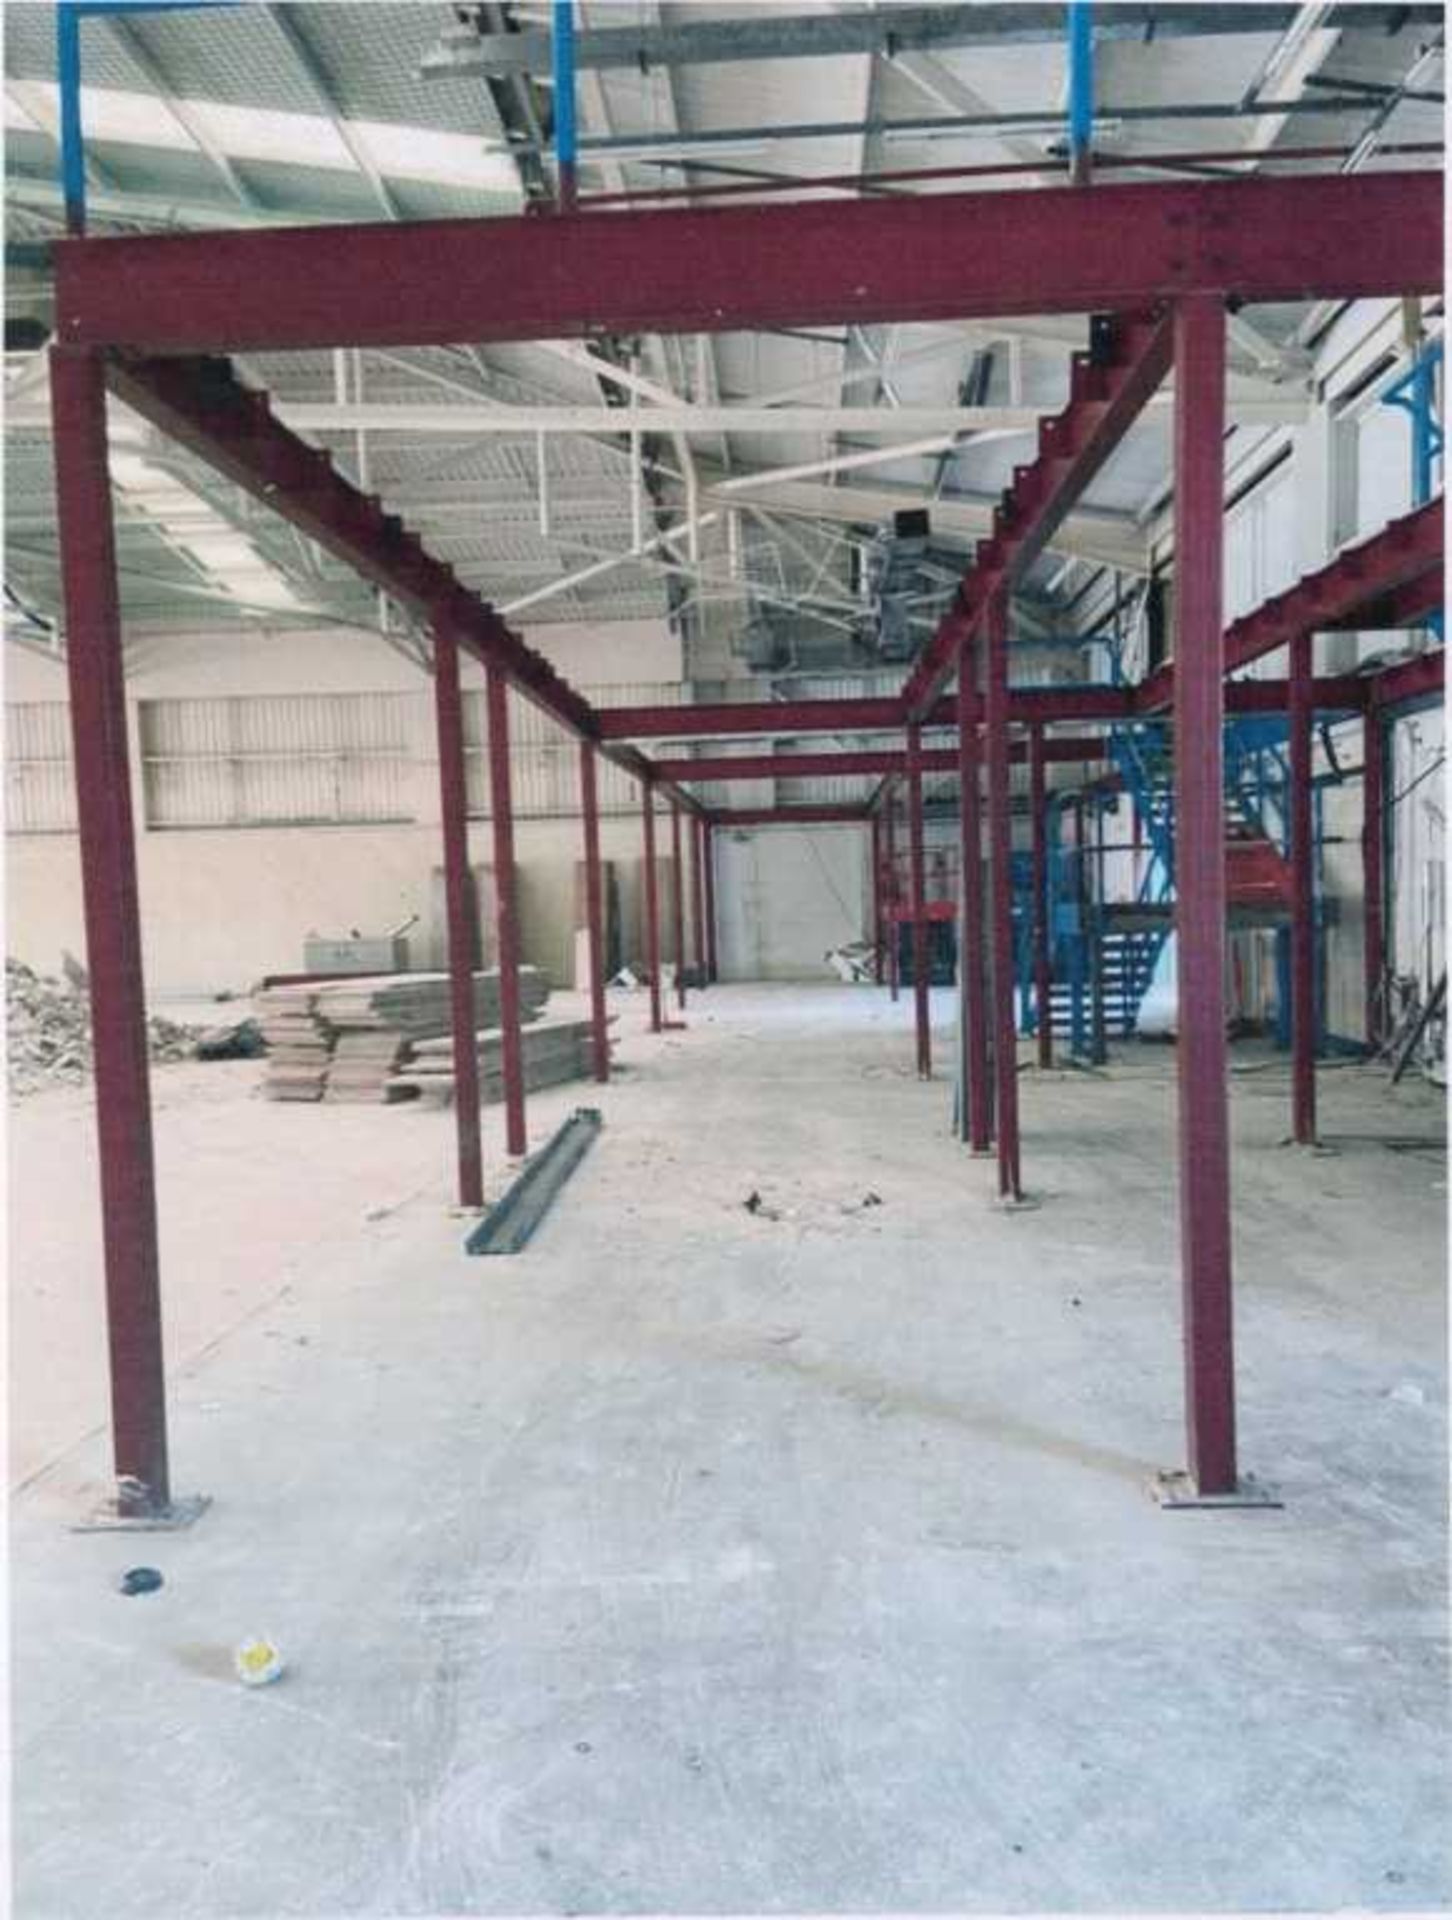 Mezzanine Floor (Approx 24m x 6.6m x 3m High) (No Flooring, No Railings) (Being Sold Offsite) - Image 5 of 7